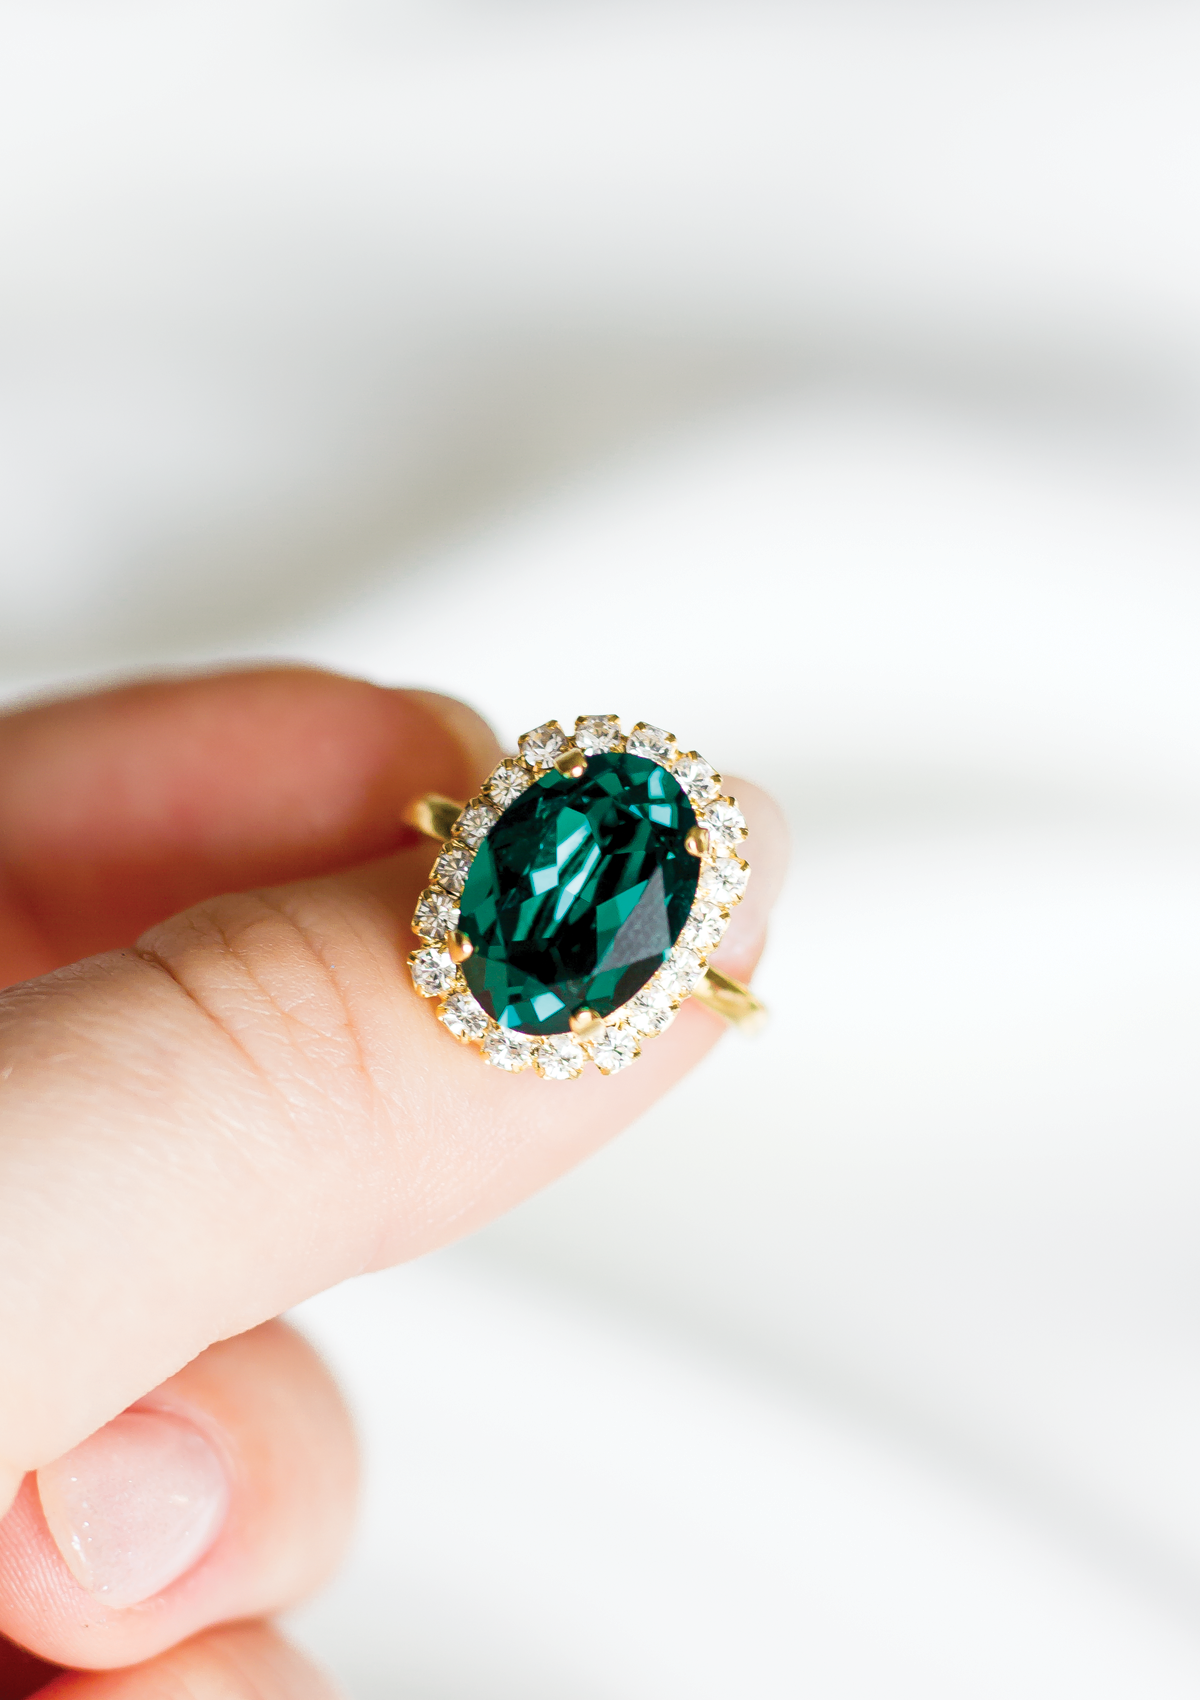 Diana Ring, jewelry designed and made by Sarah Gauci in Malta. Emerald. Gold or Rose gold plated.